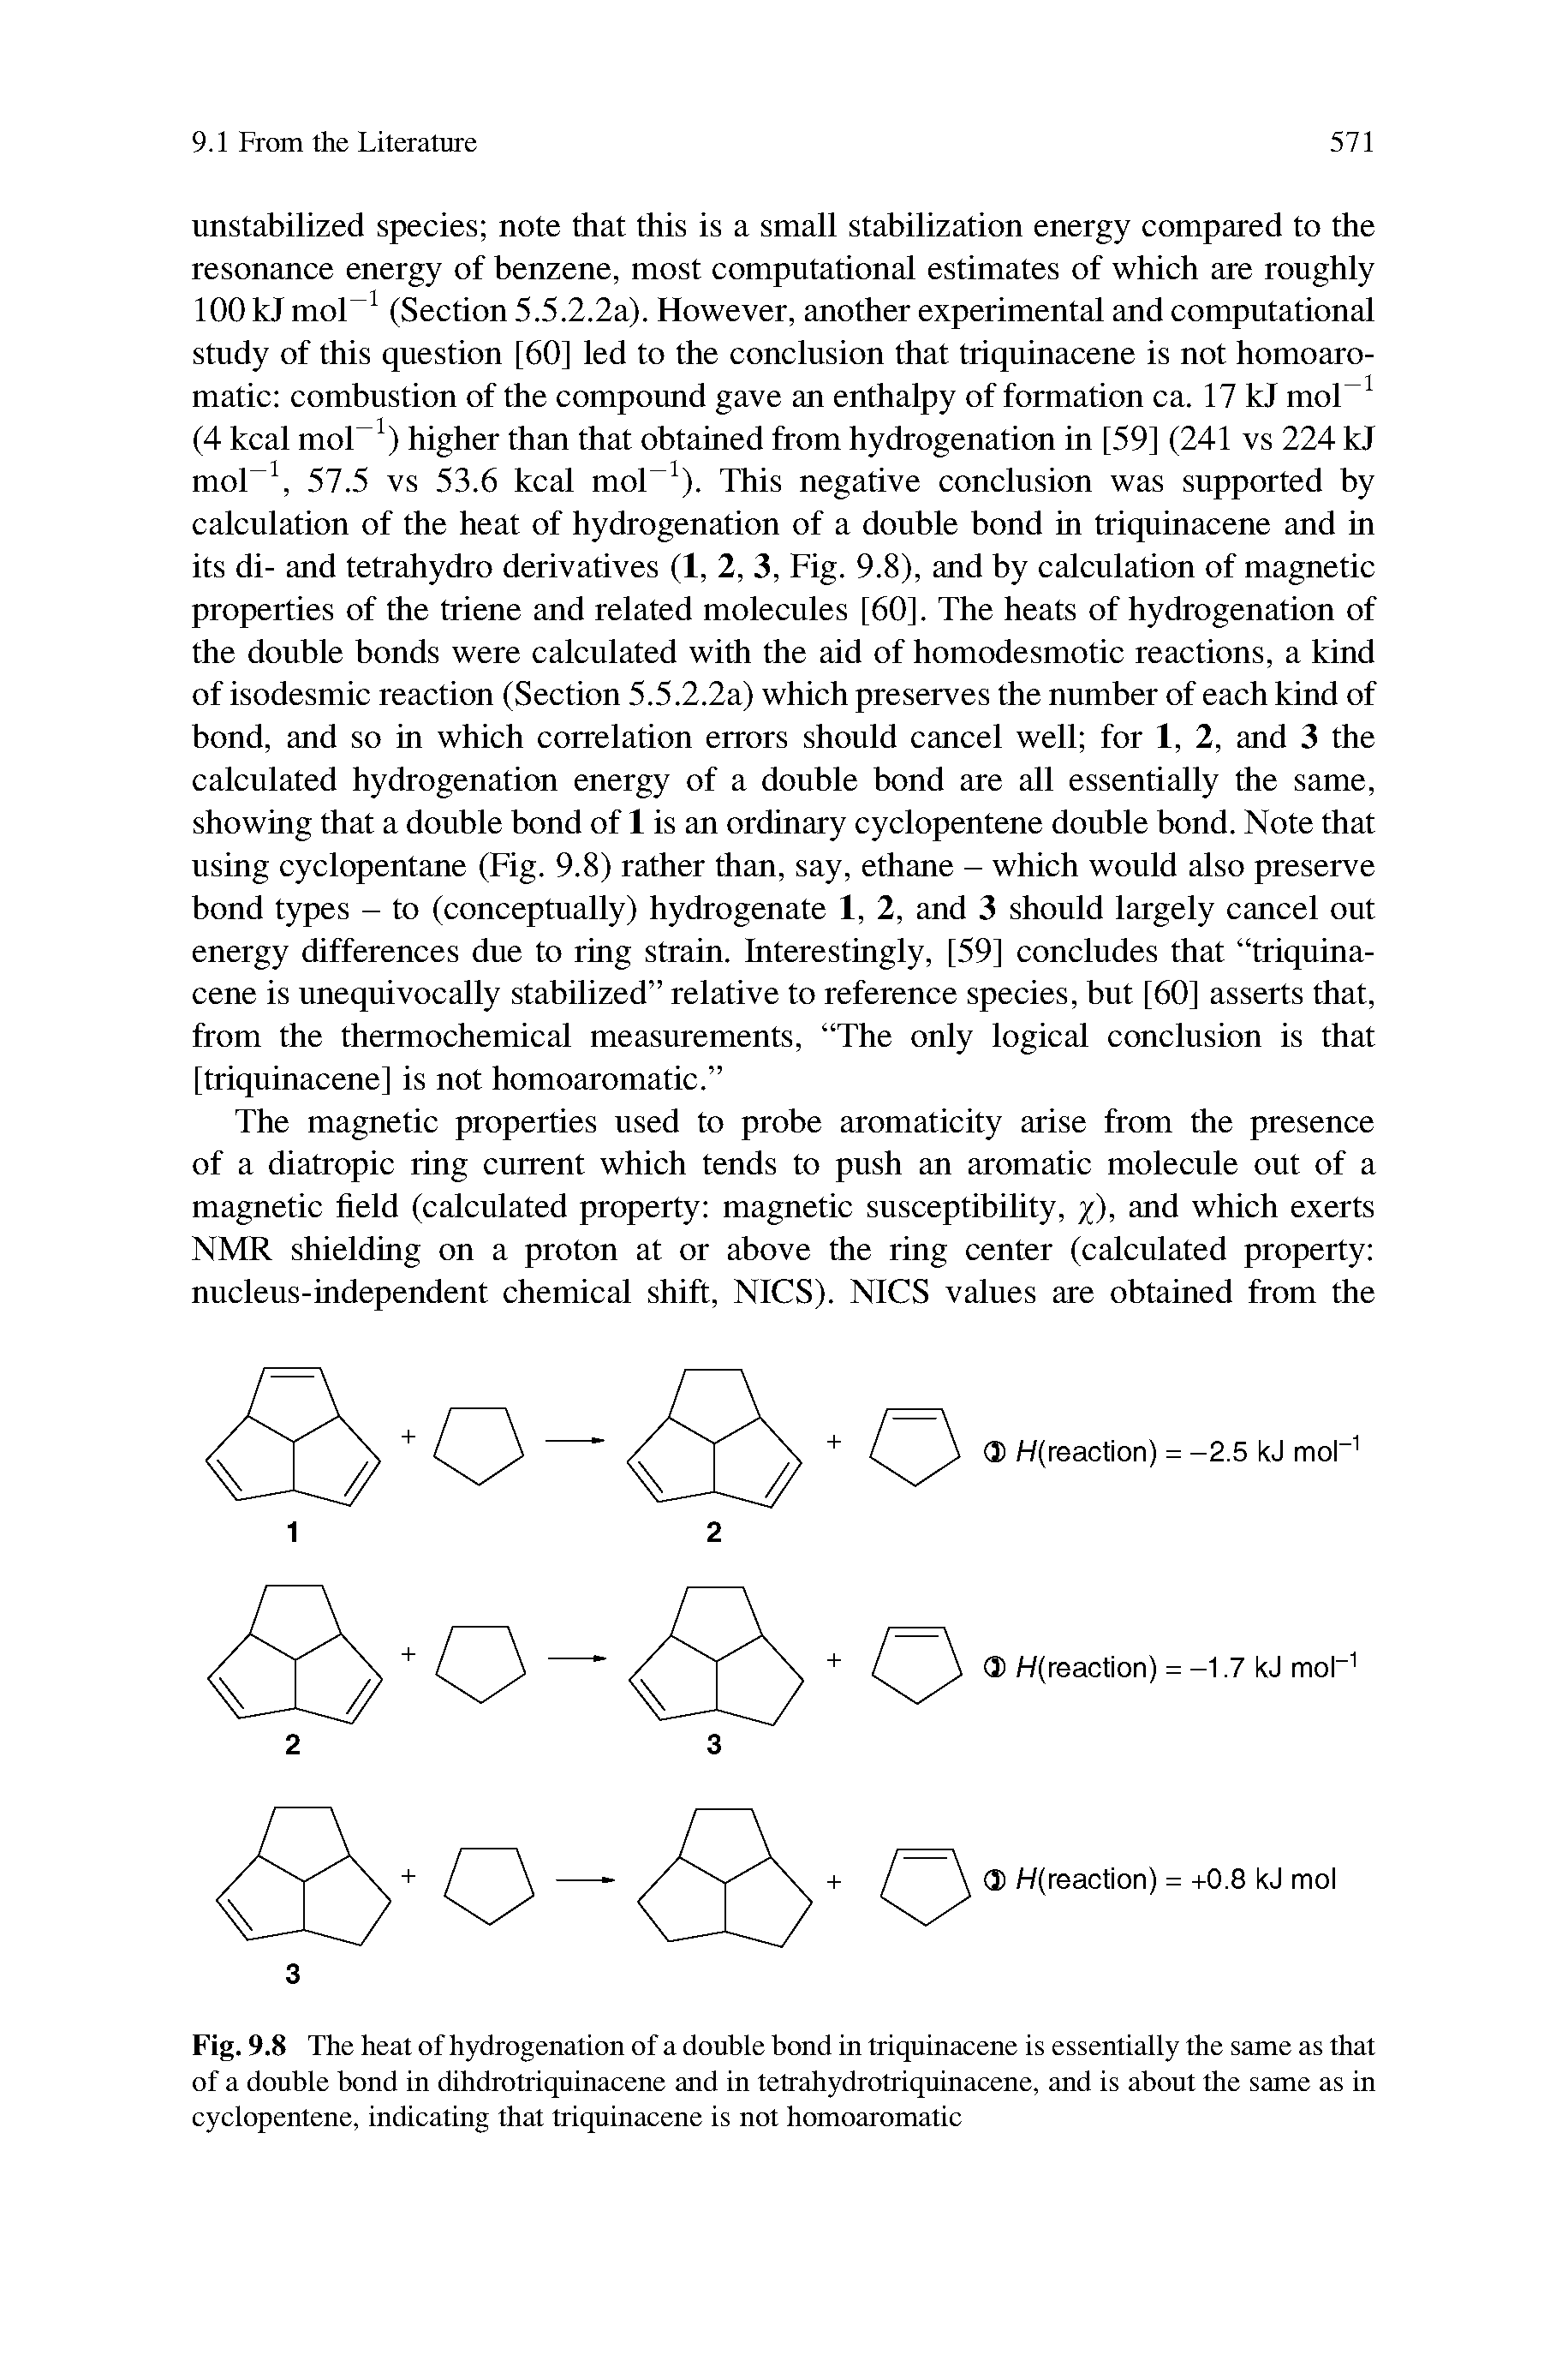 Fig. 9.8 The heat of hydrogenation of a double bond in triquinacene is essentially the same as that of a double bond in dihdrotriquinacene and in tetrahydrotriquinacene, and is about the same as in cyclopentene, indicating that triquinacene is not homoaromatic...